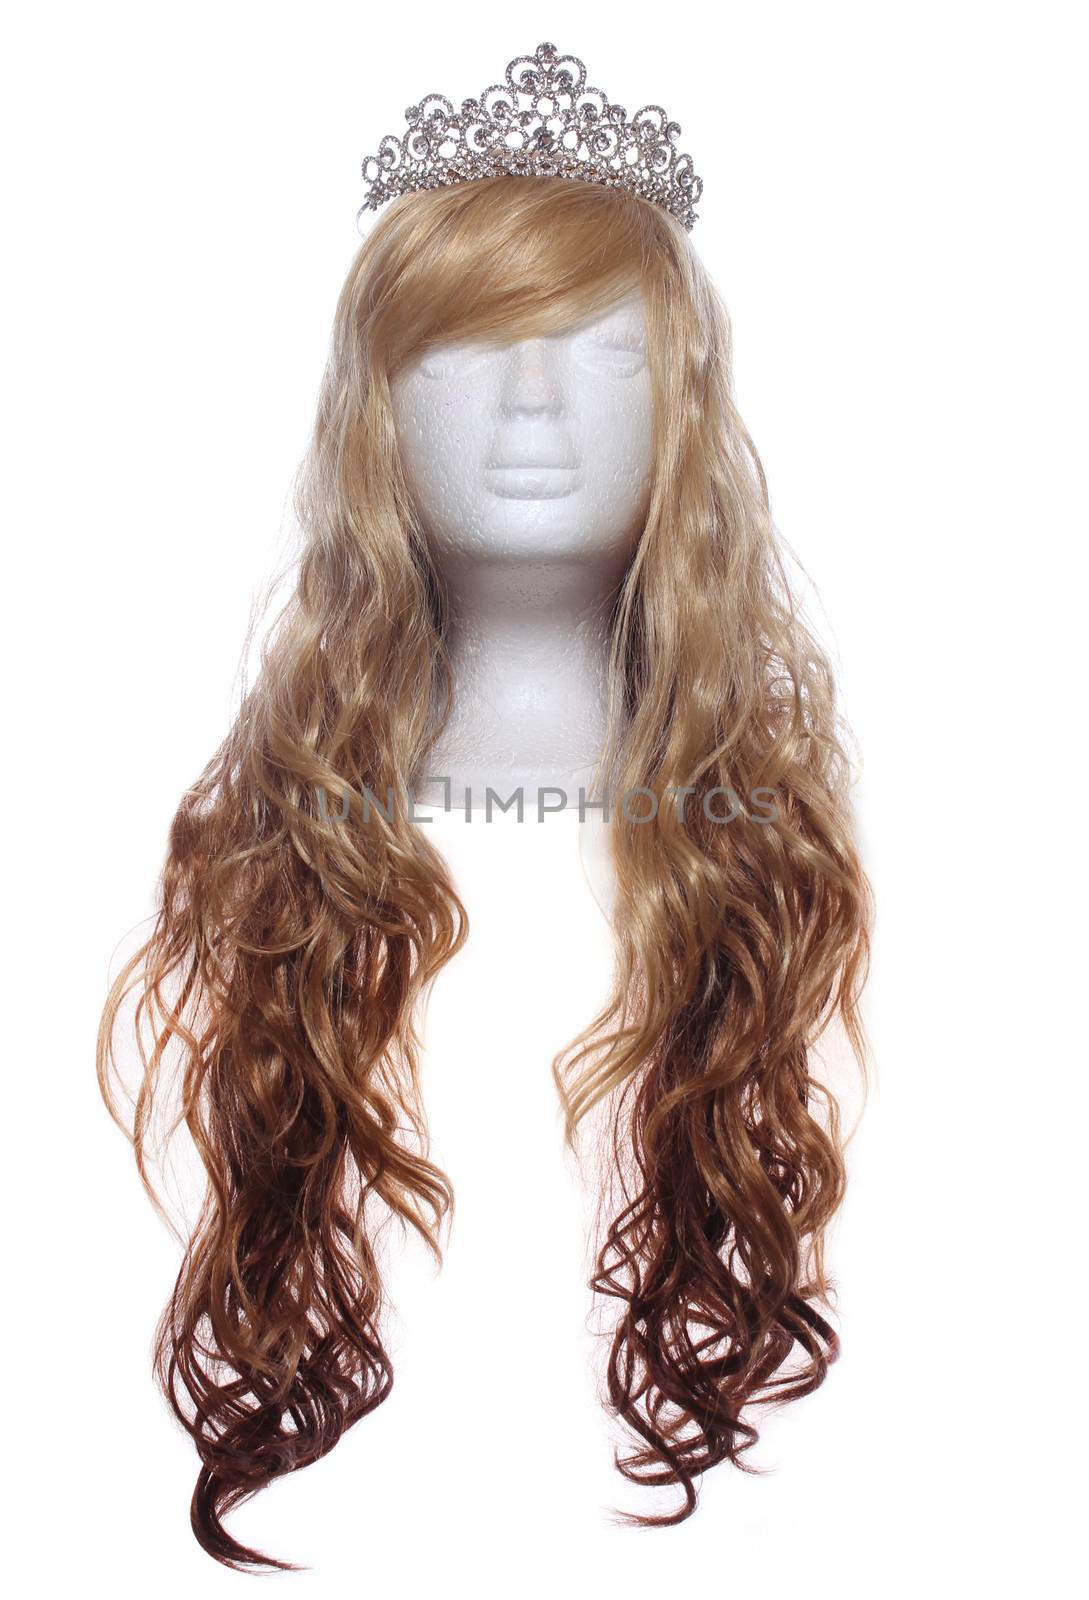 Two Toned Blond Wig on Mannequin Head with tiara, white background